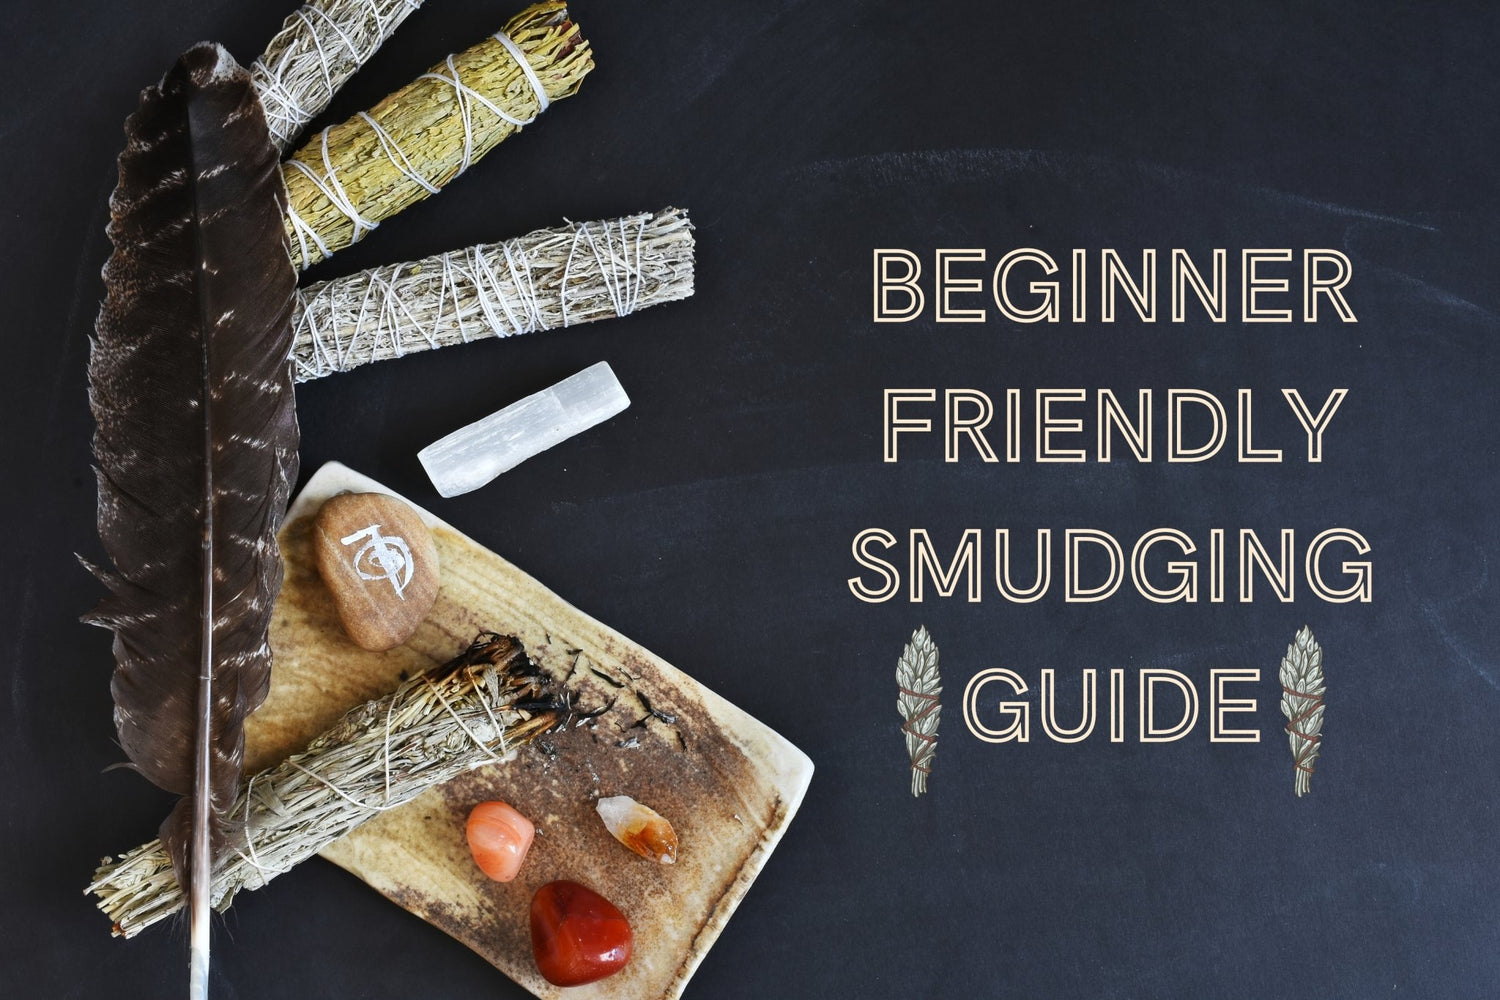 Beginner Friendly Smudging Guide | Detailed guide with instructions, explanations of why people chose to smudge and burn sage, blessings to set your intention, and more.